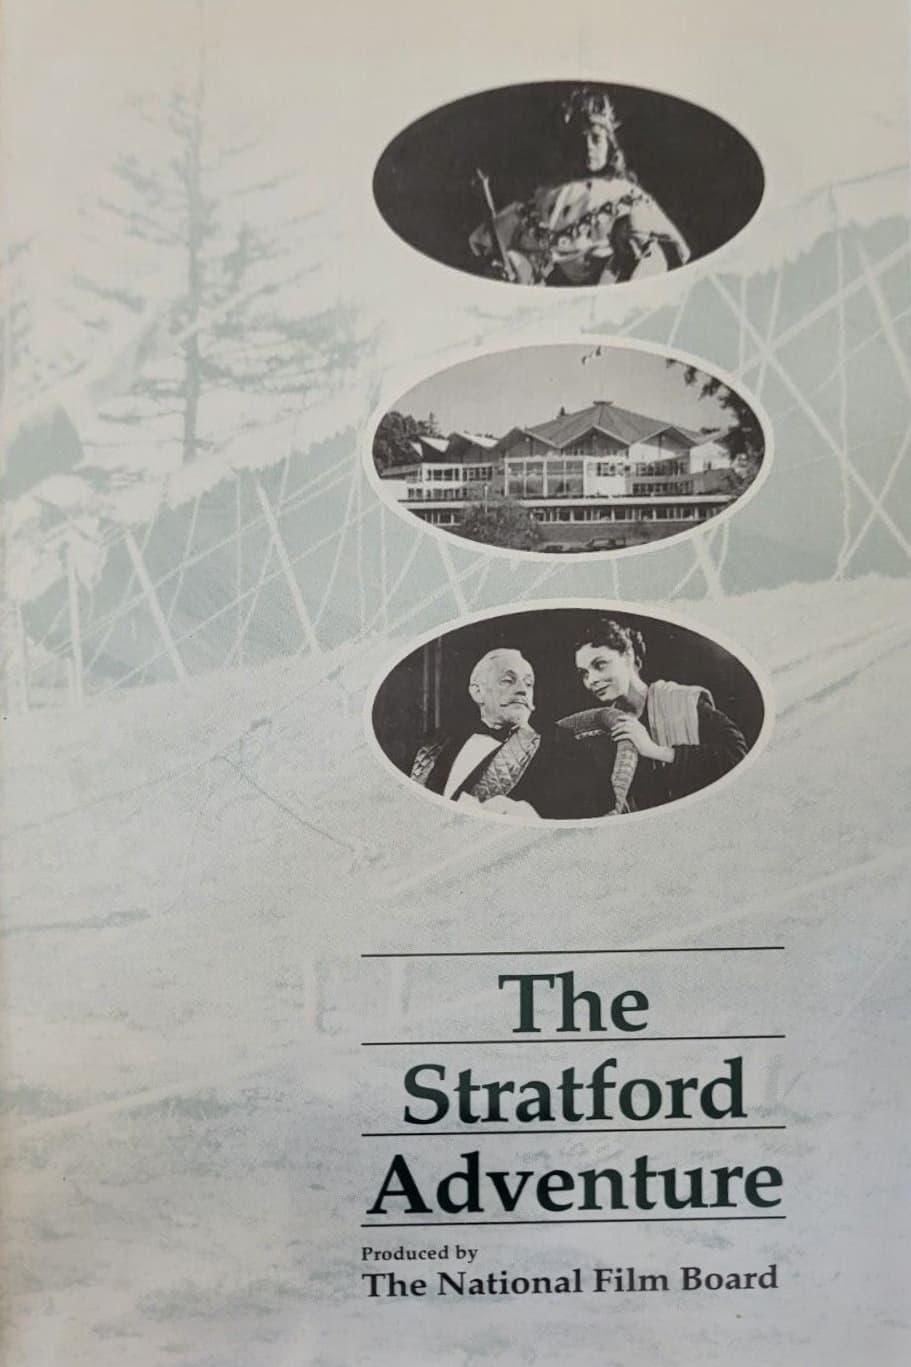 The Stratford Adventure poster